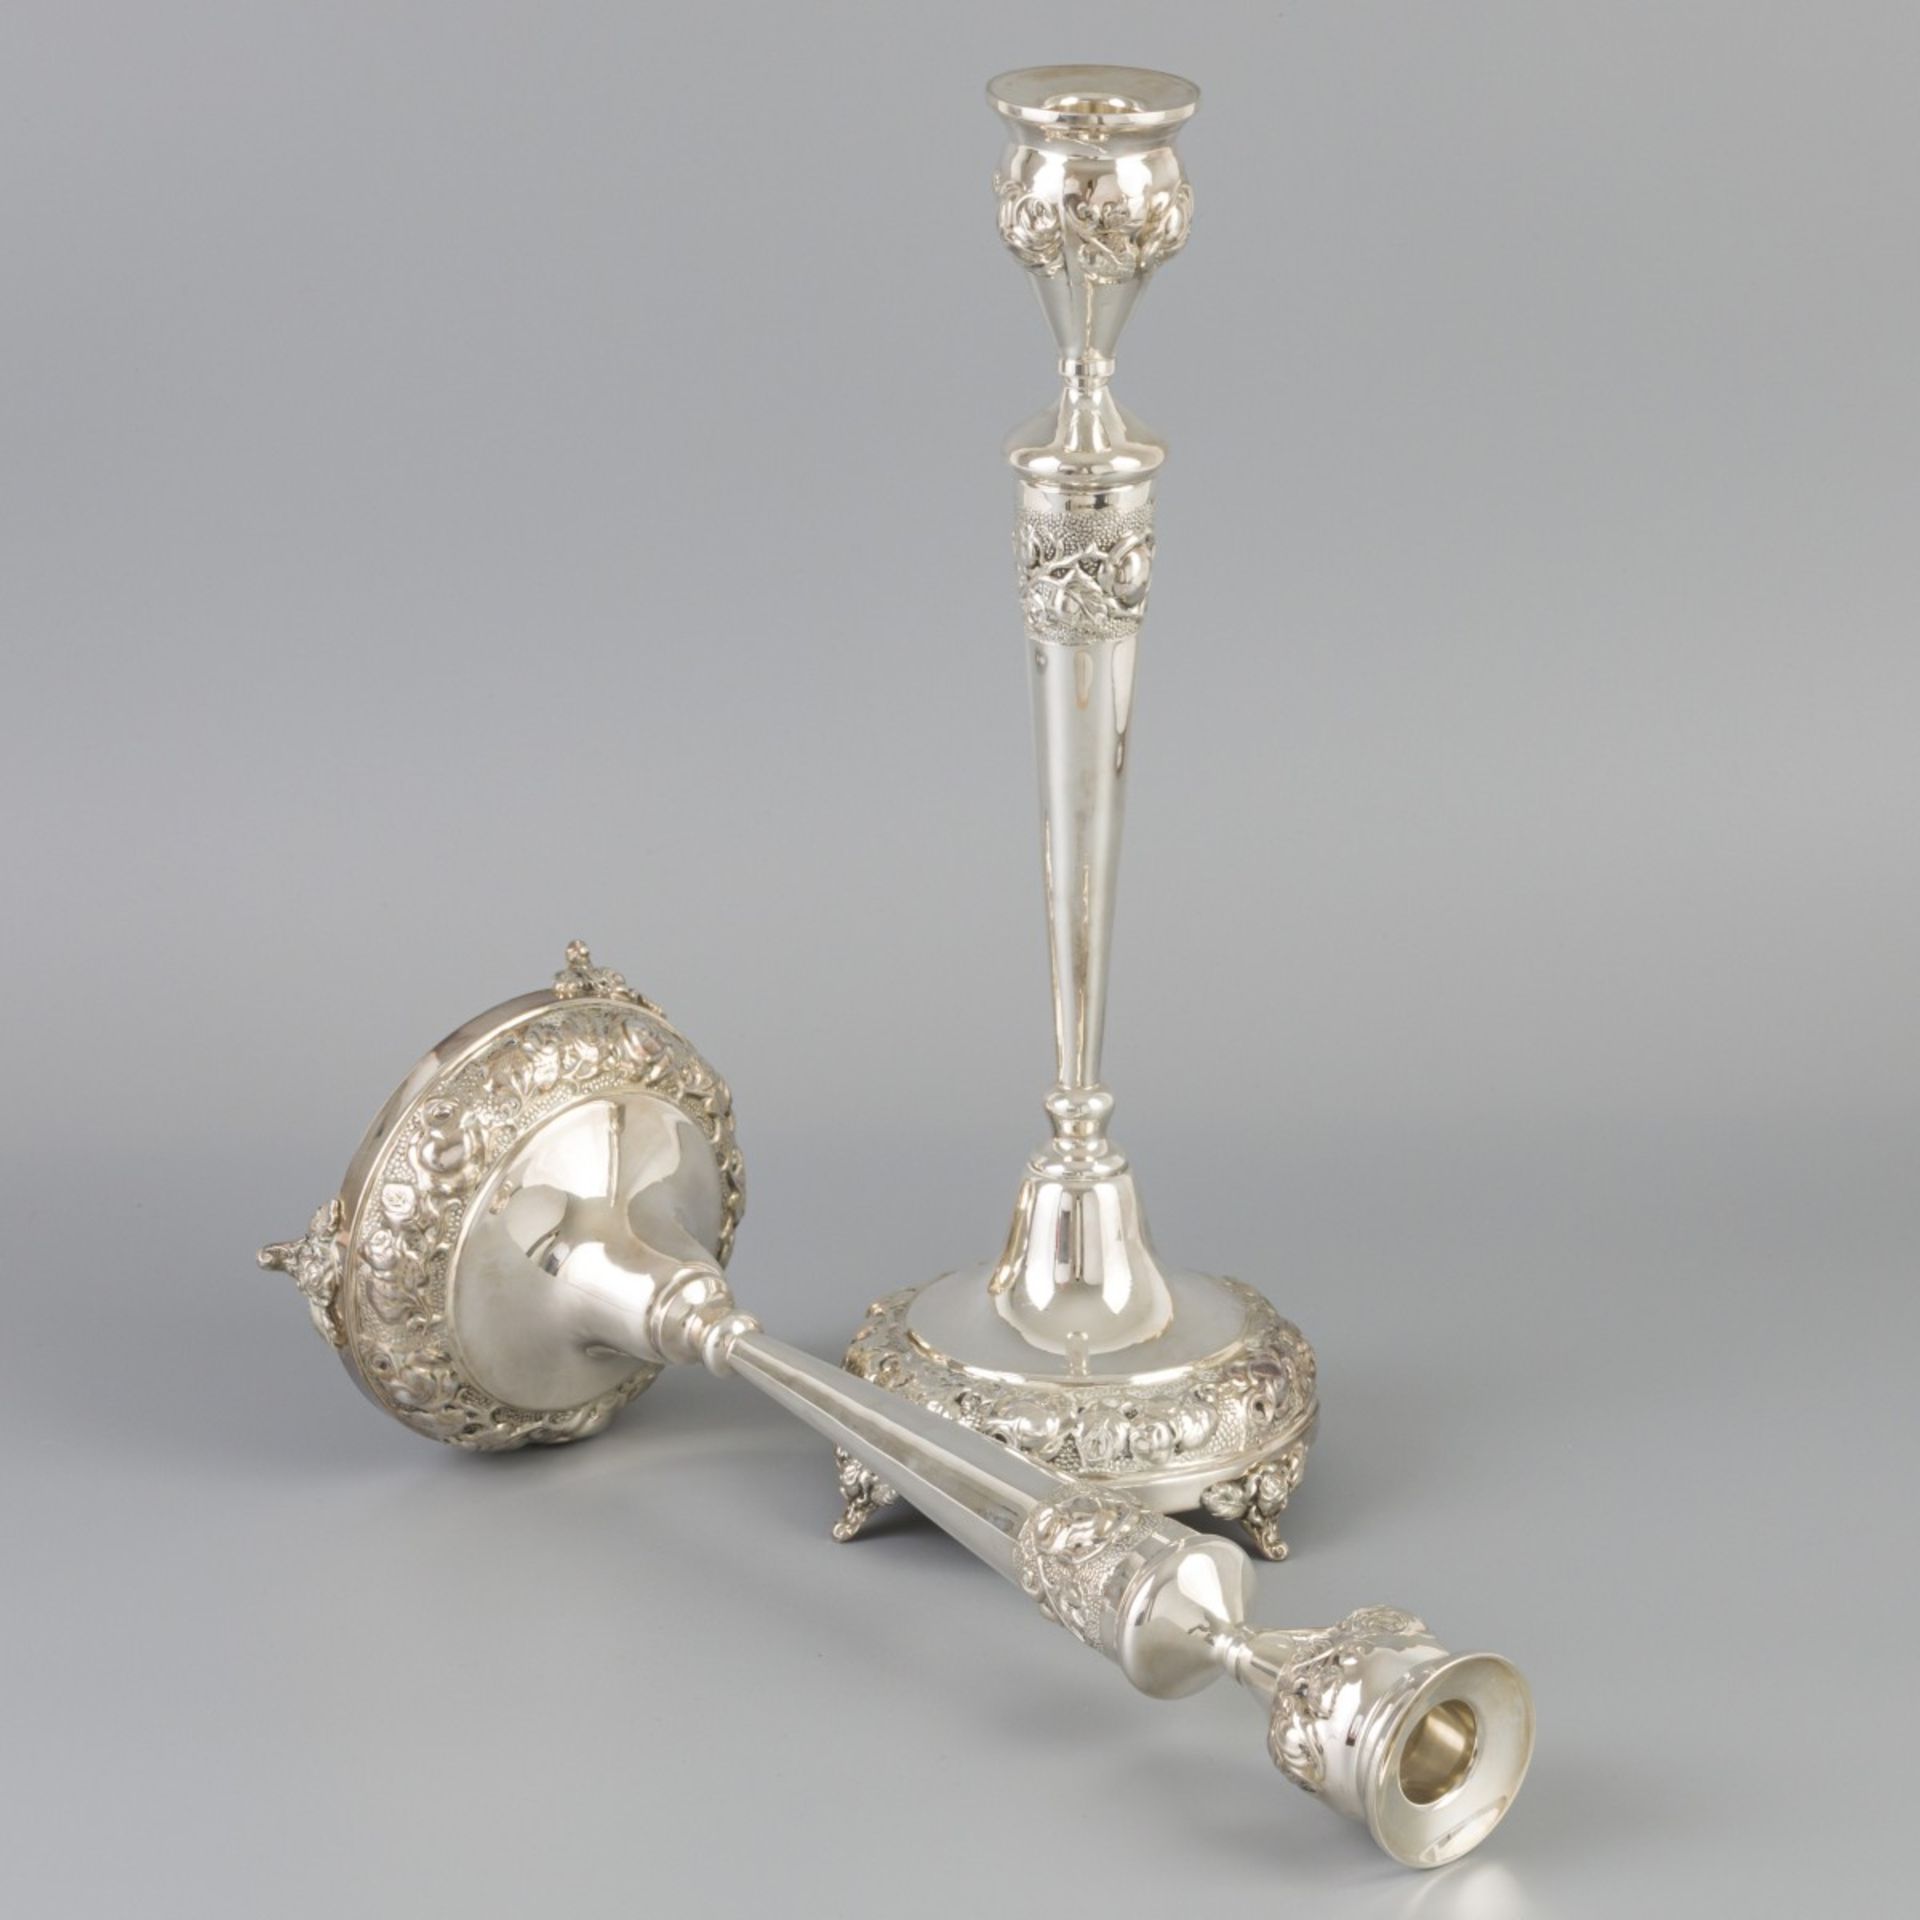 2 piece set of candlesticks silver. - Image 3 of 9